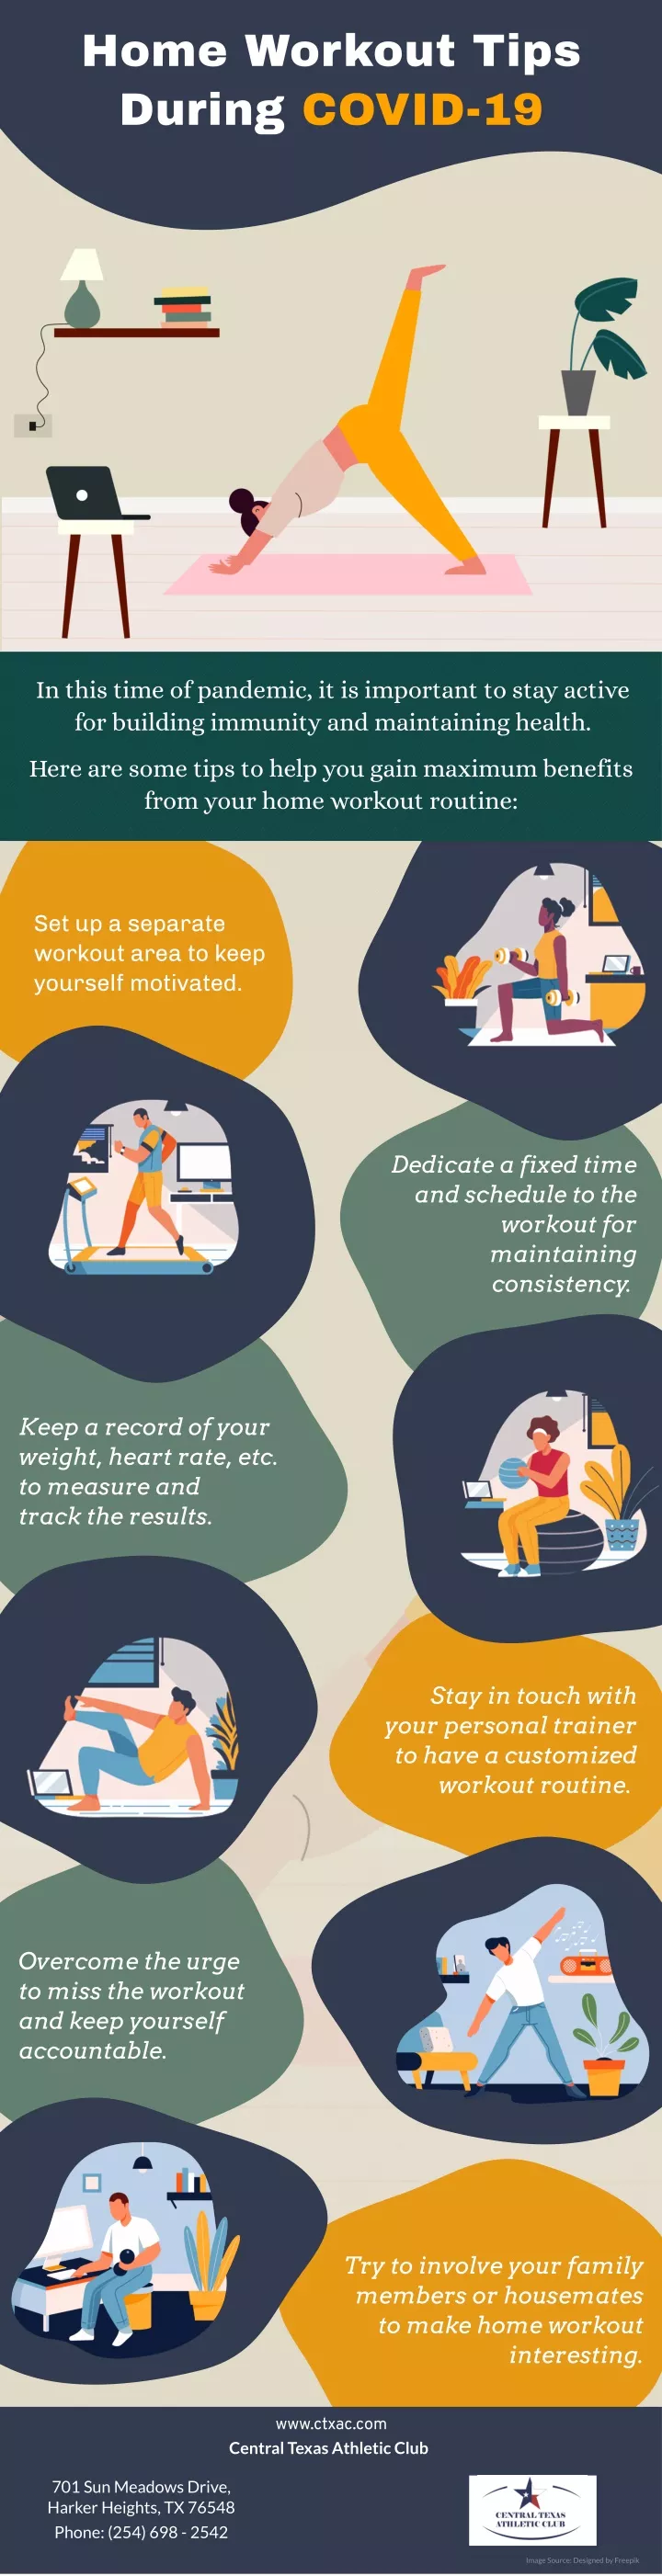 home workout tips during covid 19